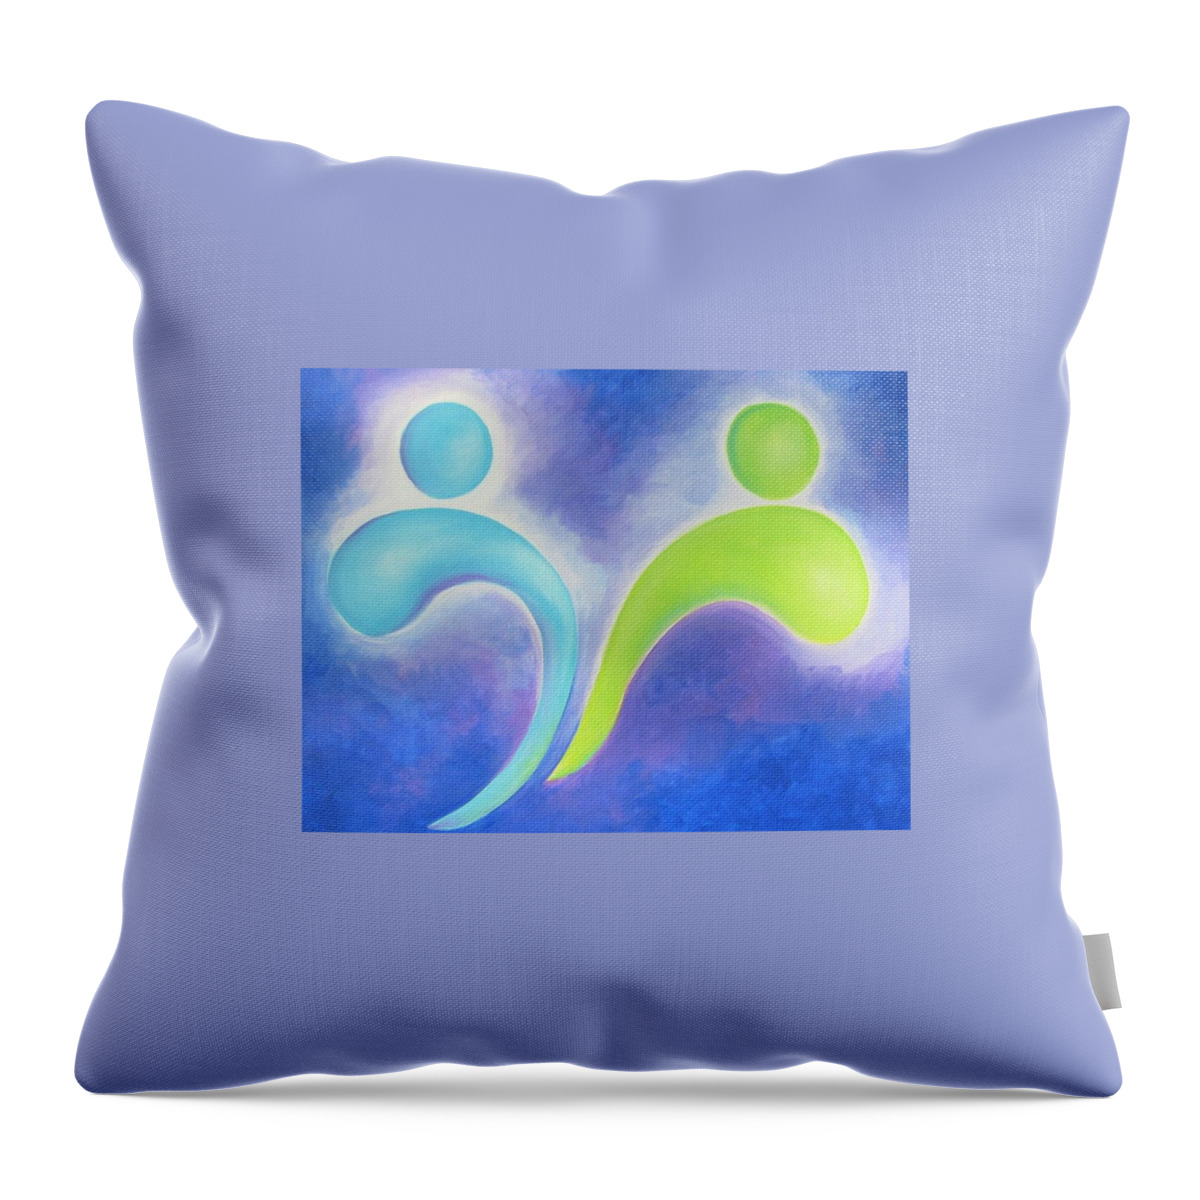 Figurative Abstract Throw Pillow featuring the painting Transition...shift by Jennifer Hannigan-Green